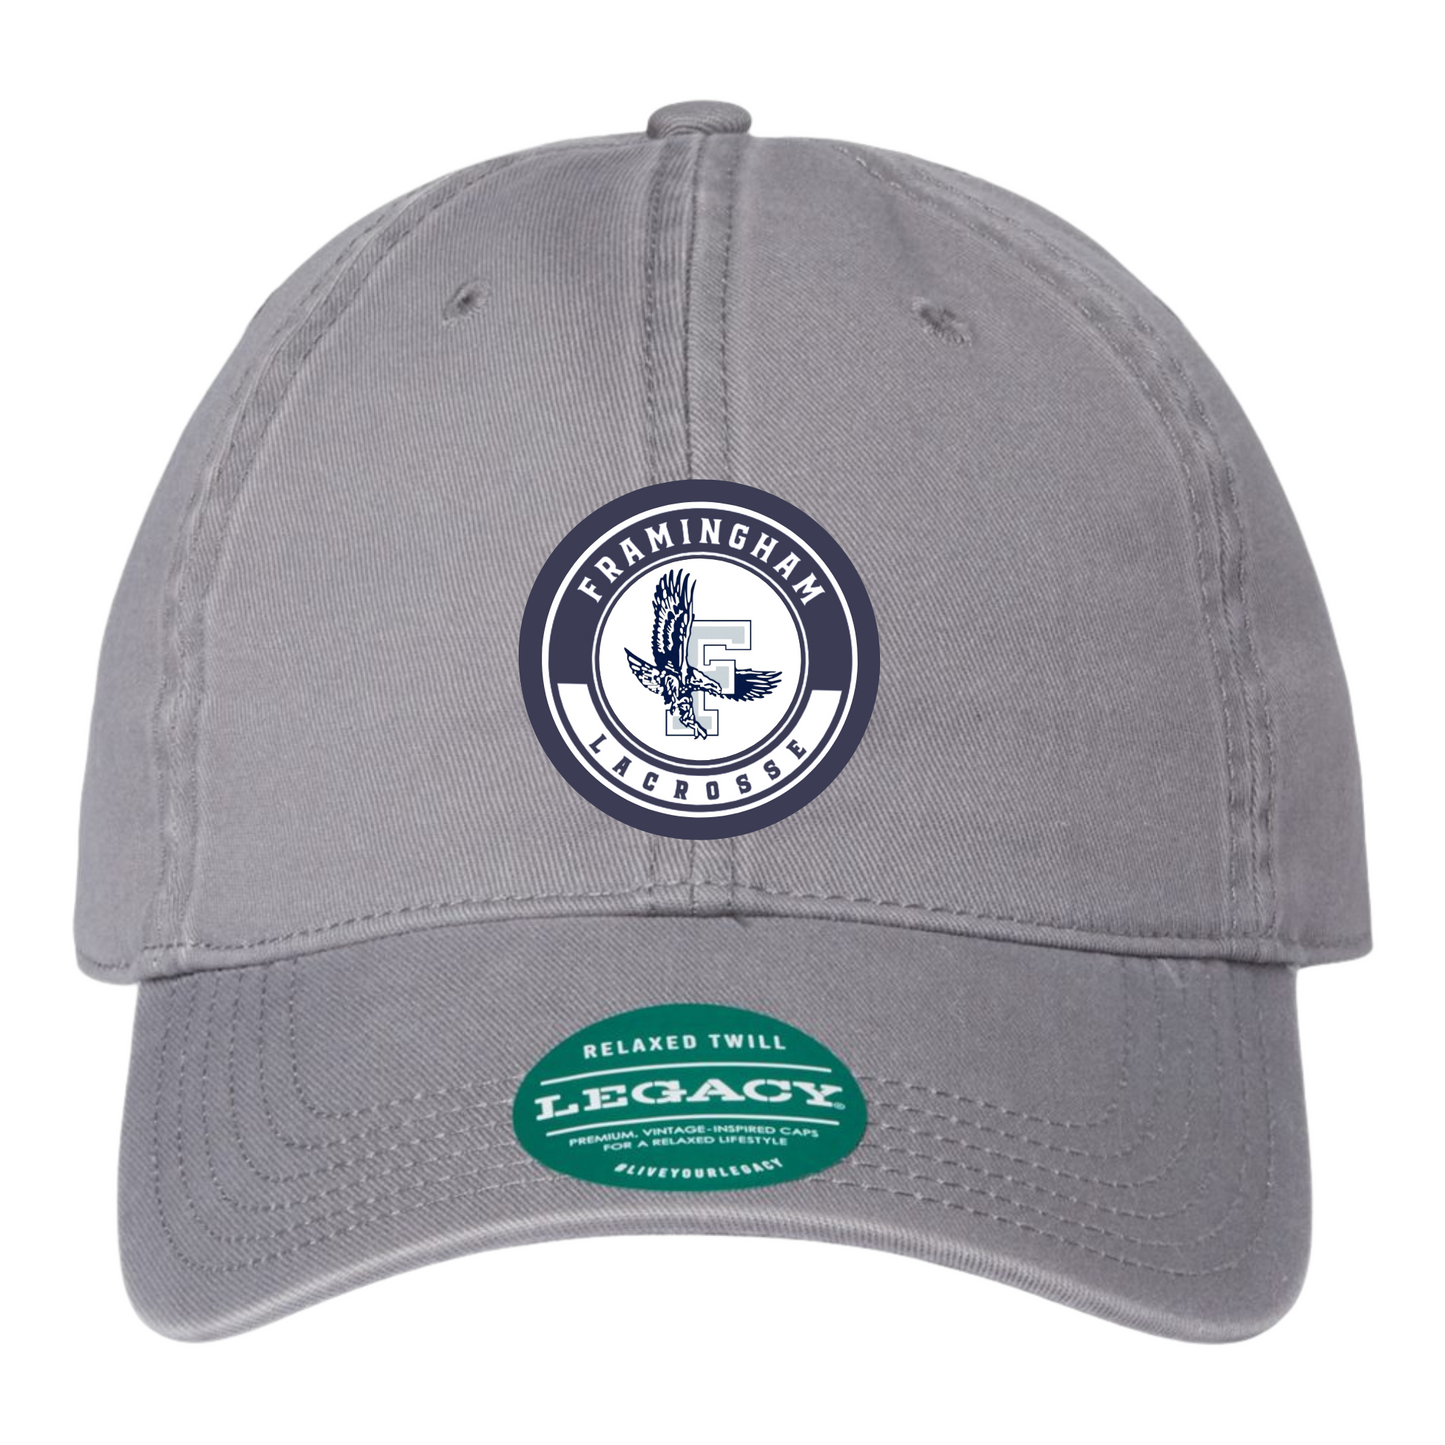 FRAMINGHAM HIGH LACROSSE RELAXED TWILL DAD HAT - GRAY